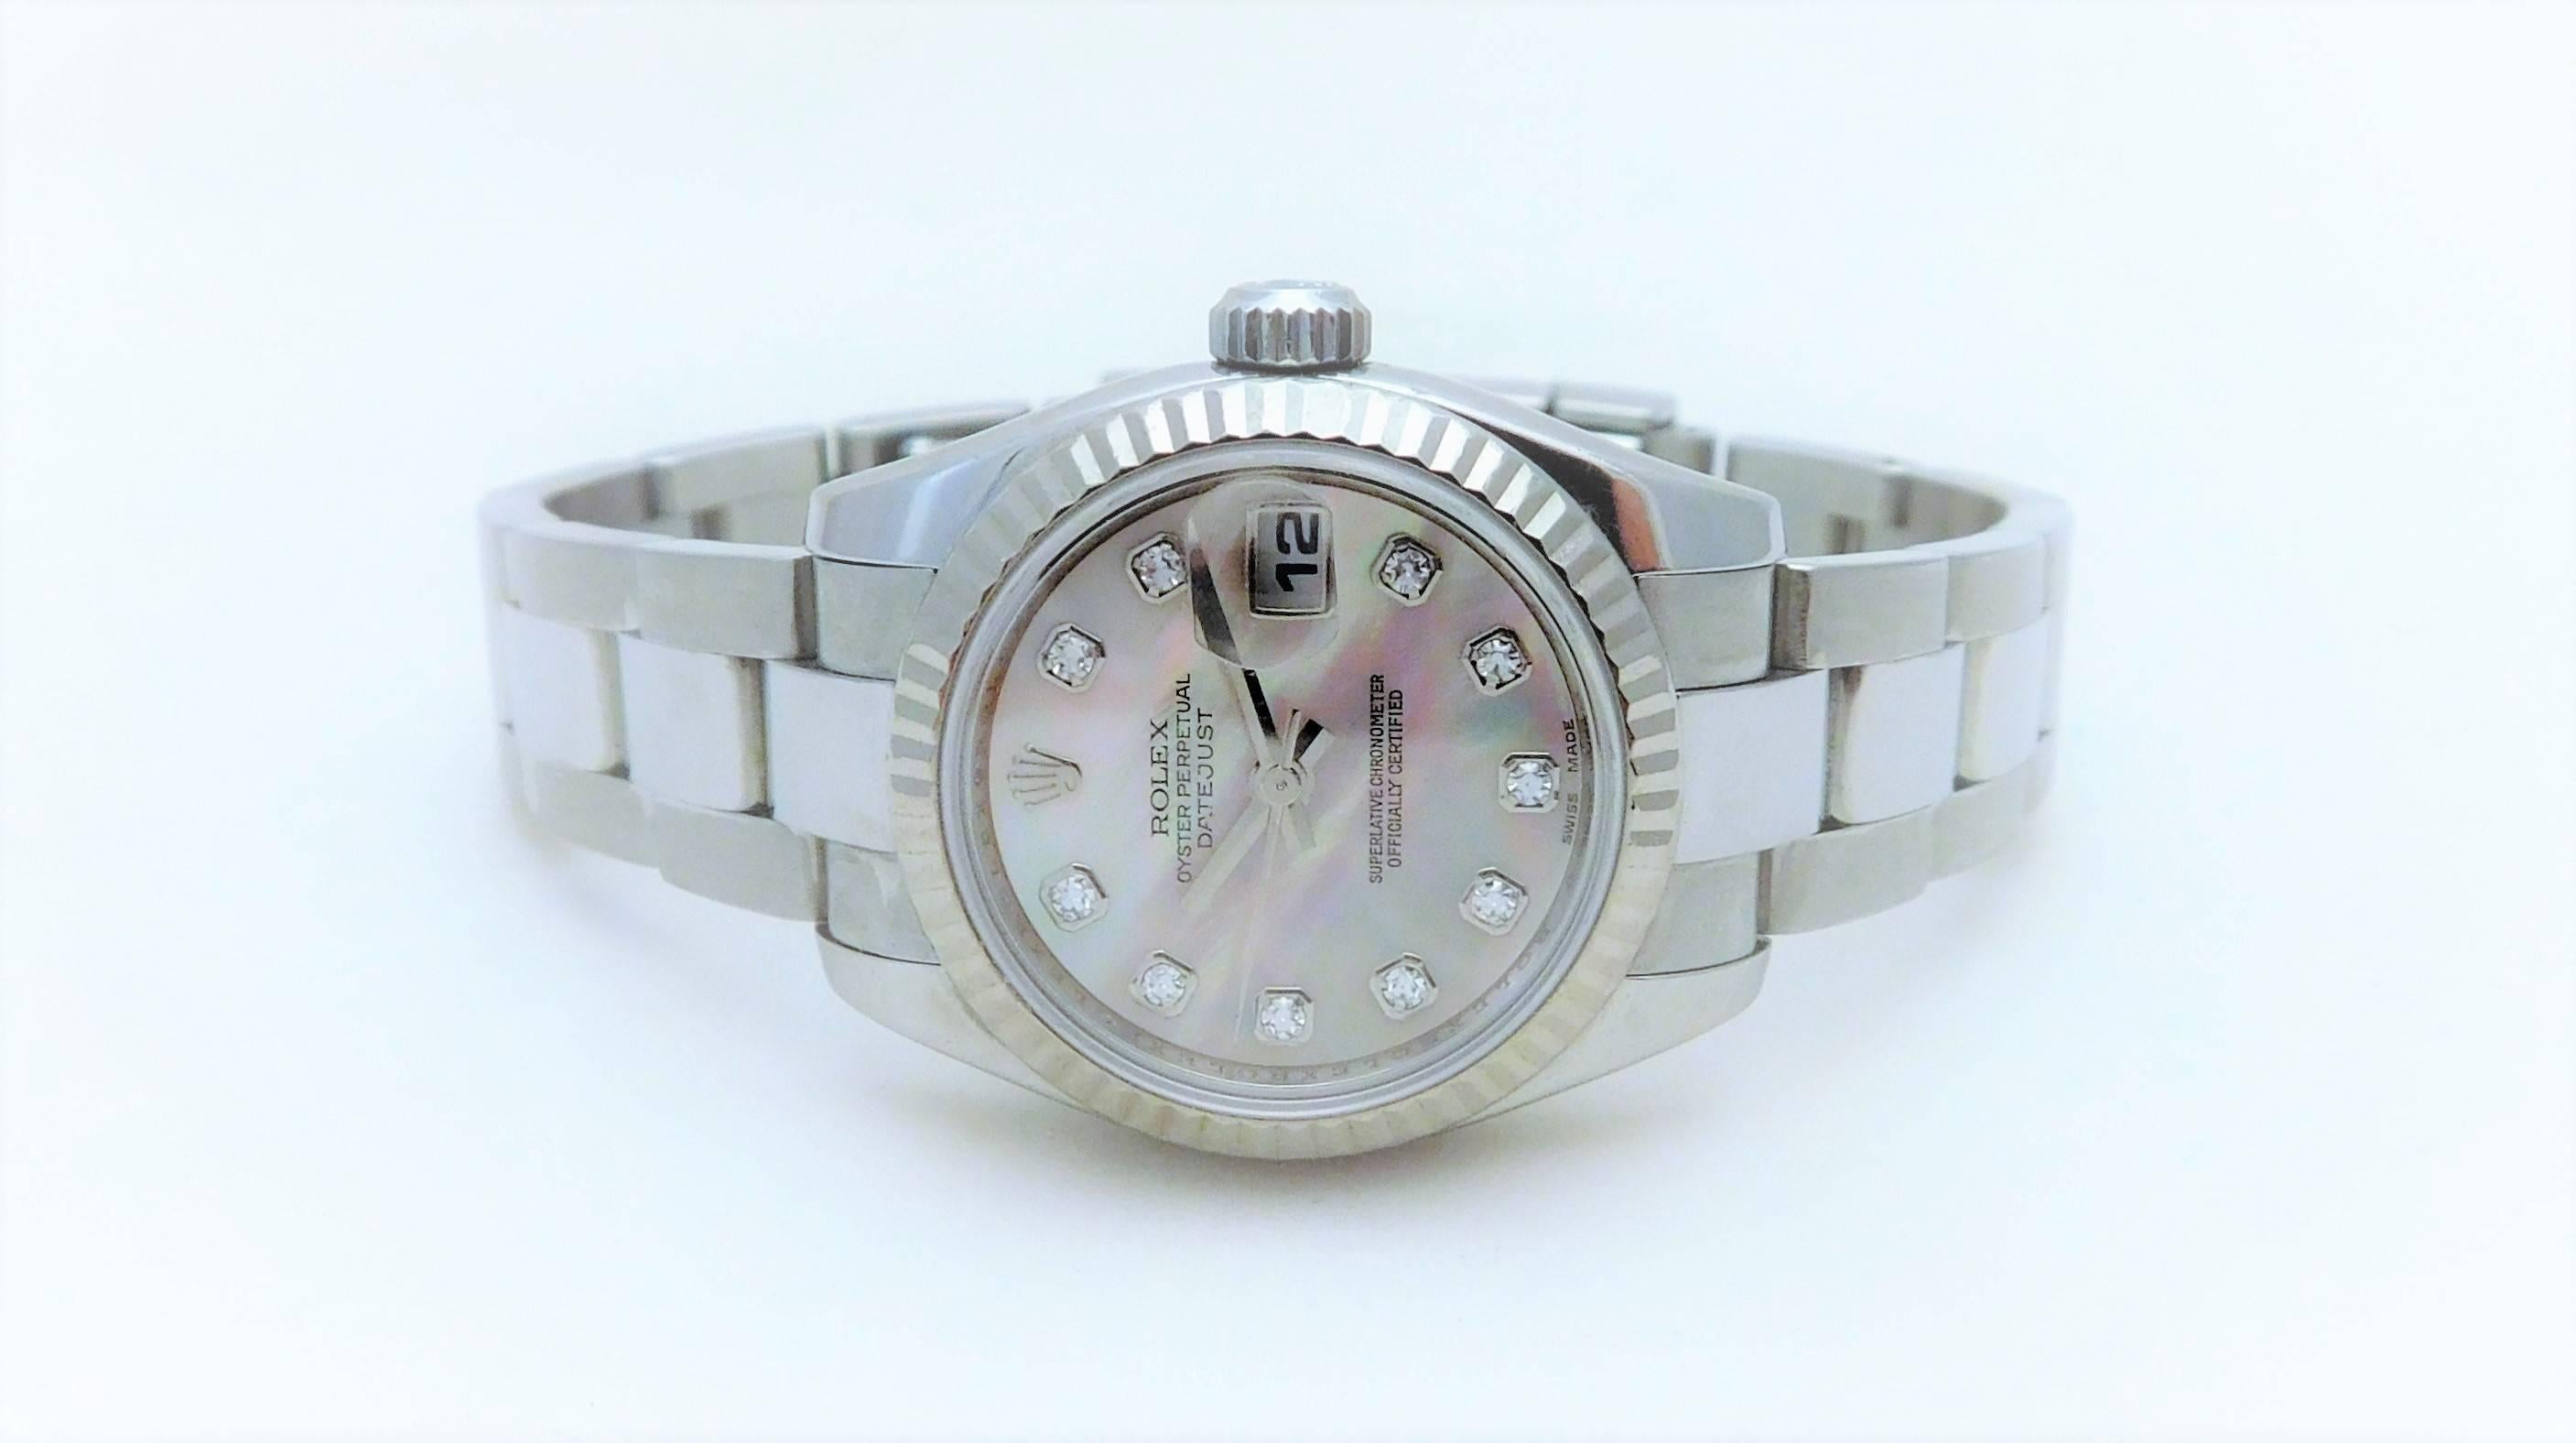 This Ladies Rolex Oyster Perpetual DateJust is in near perfect mint condition and in perfect working order.  The Rolex Date Oyster Perpetual DateJust is one of the most sought after ladies’ luxury time pieces in the world.  It is a symbol of status.